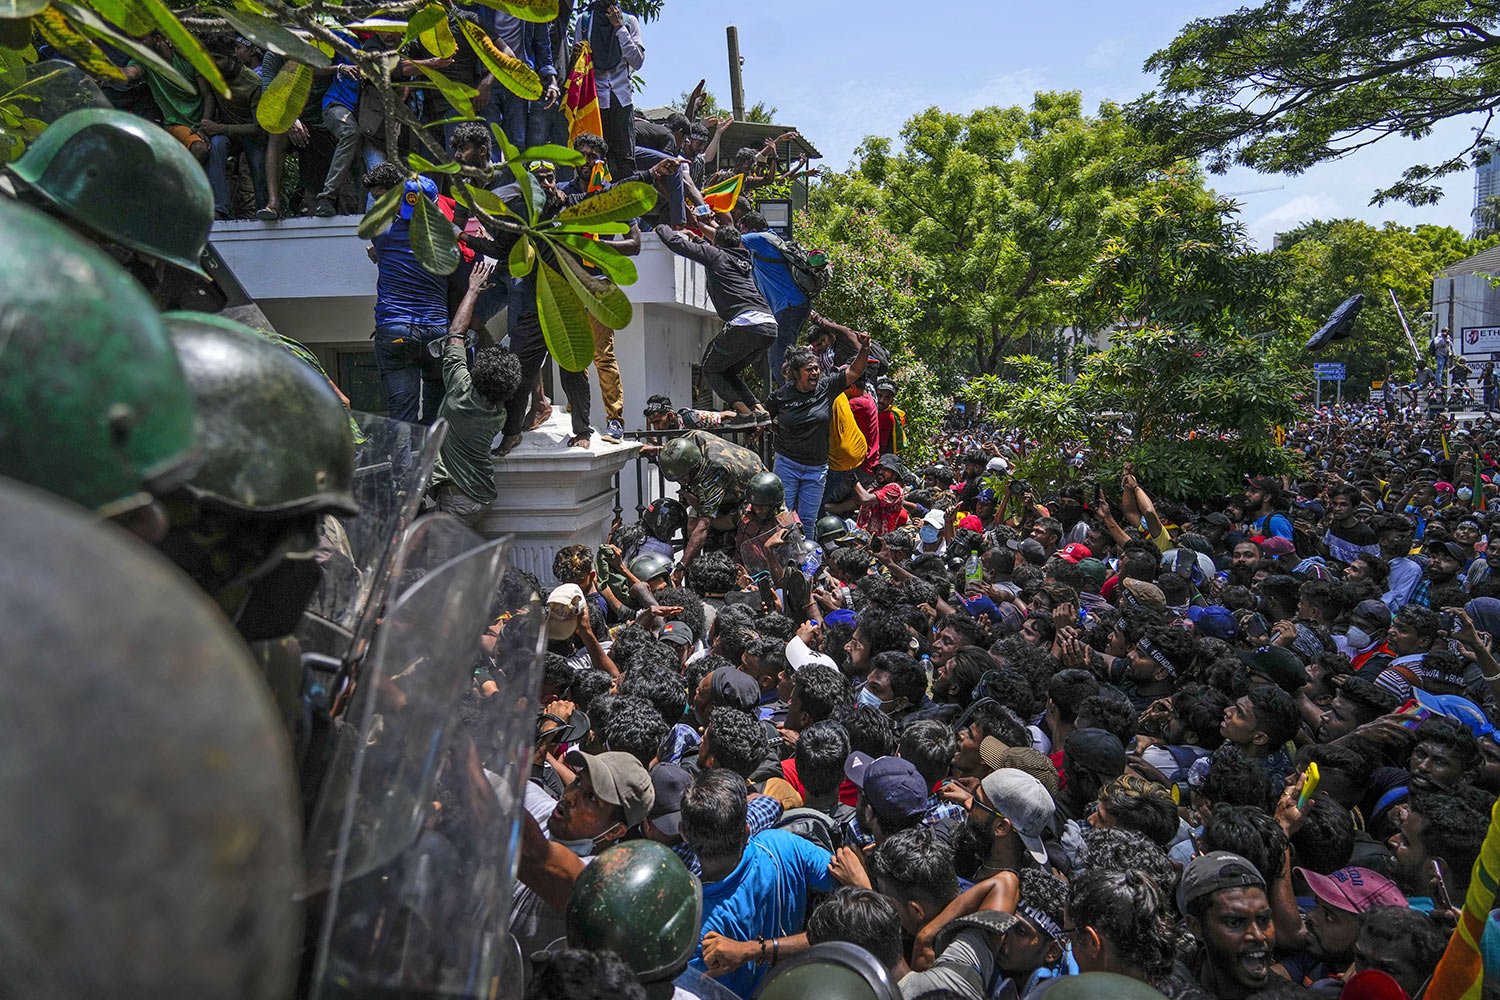  Protesters storm the Sri Lankan Prime Minister Ranil Wickremesinghe's office, demanding he resign after President Gotabaya Rajapaksa fled the country amid an economic crisis, in Colombo, Sri Lanka, July 13, 2022. (AP Photo/Rafiq Maqbool) 